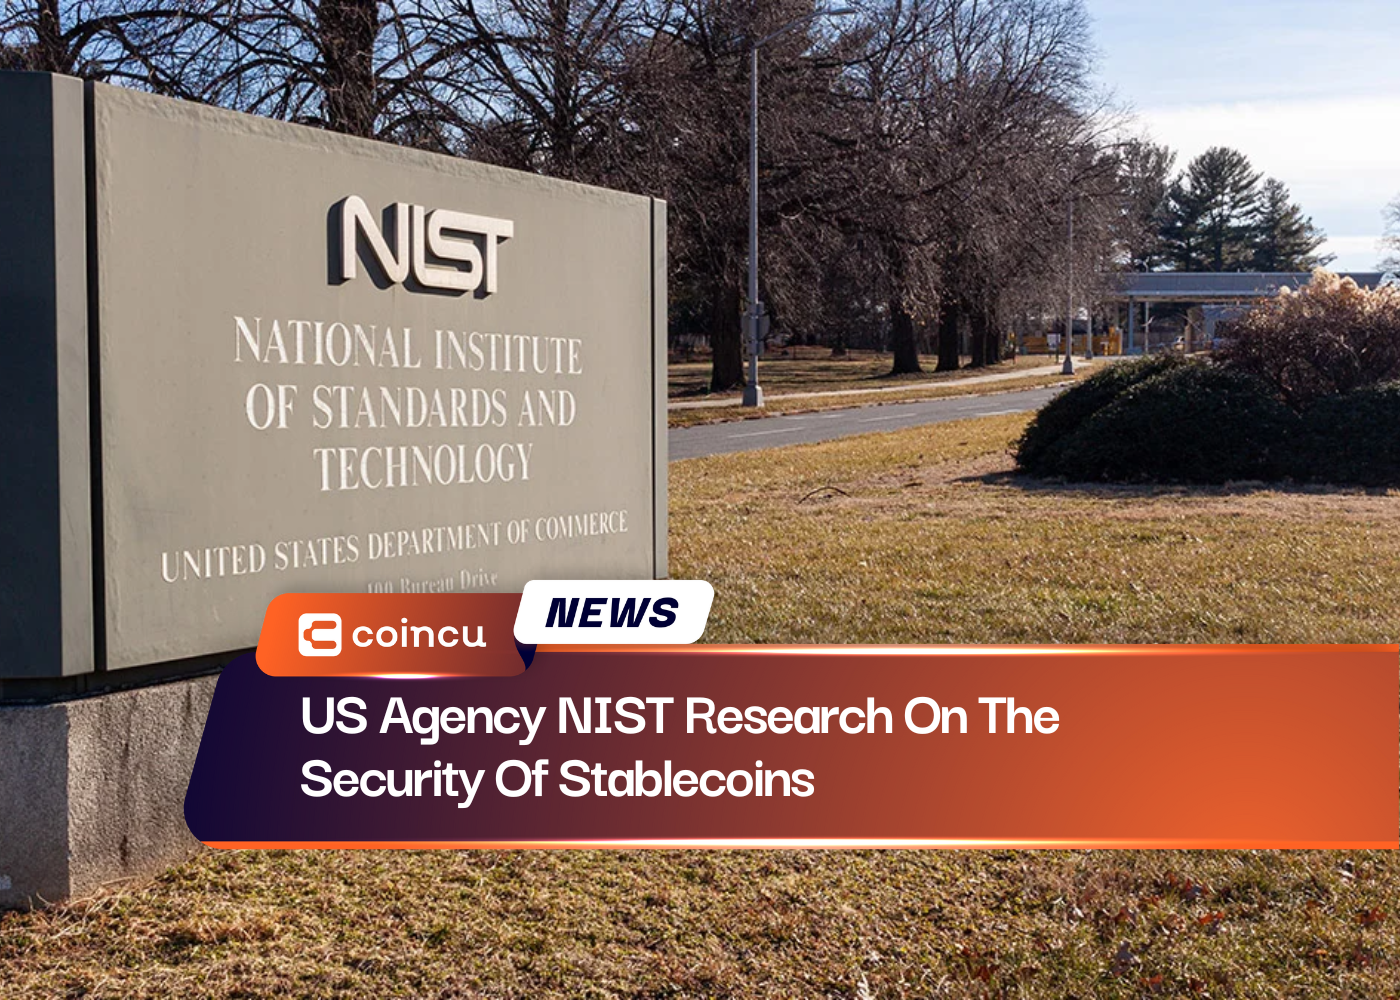 US Agency NIST Research On The Security Of Stablecoins